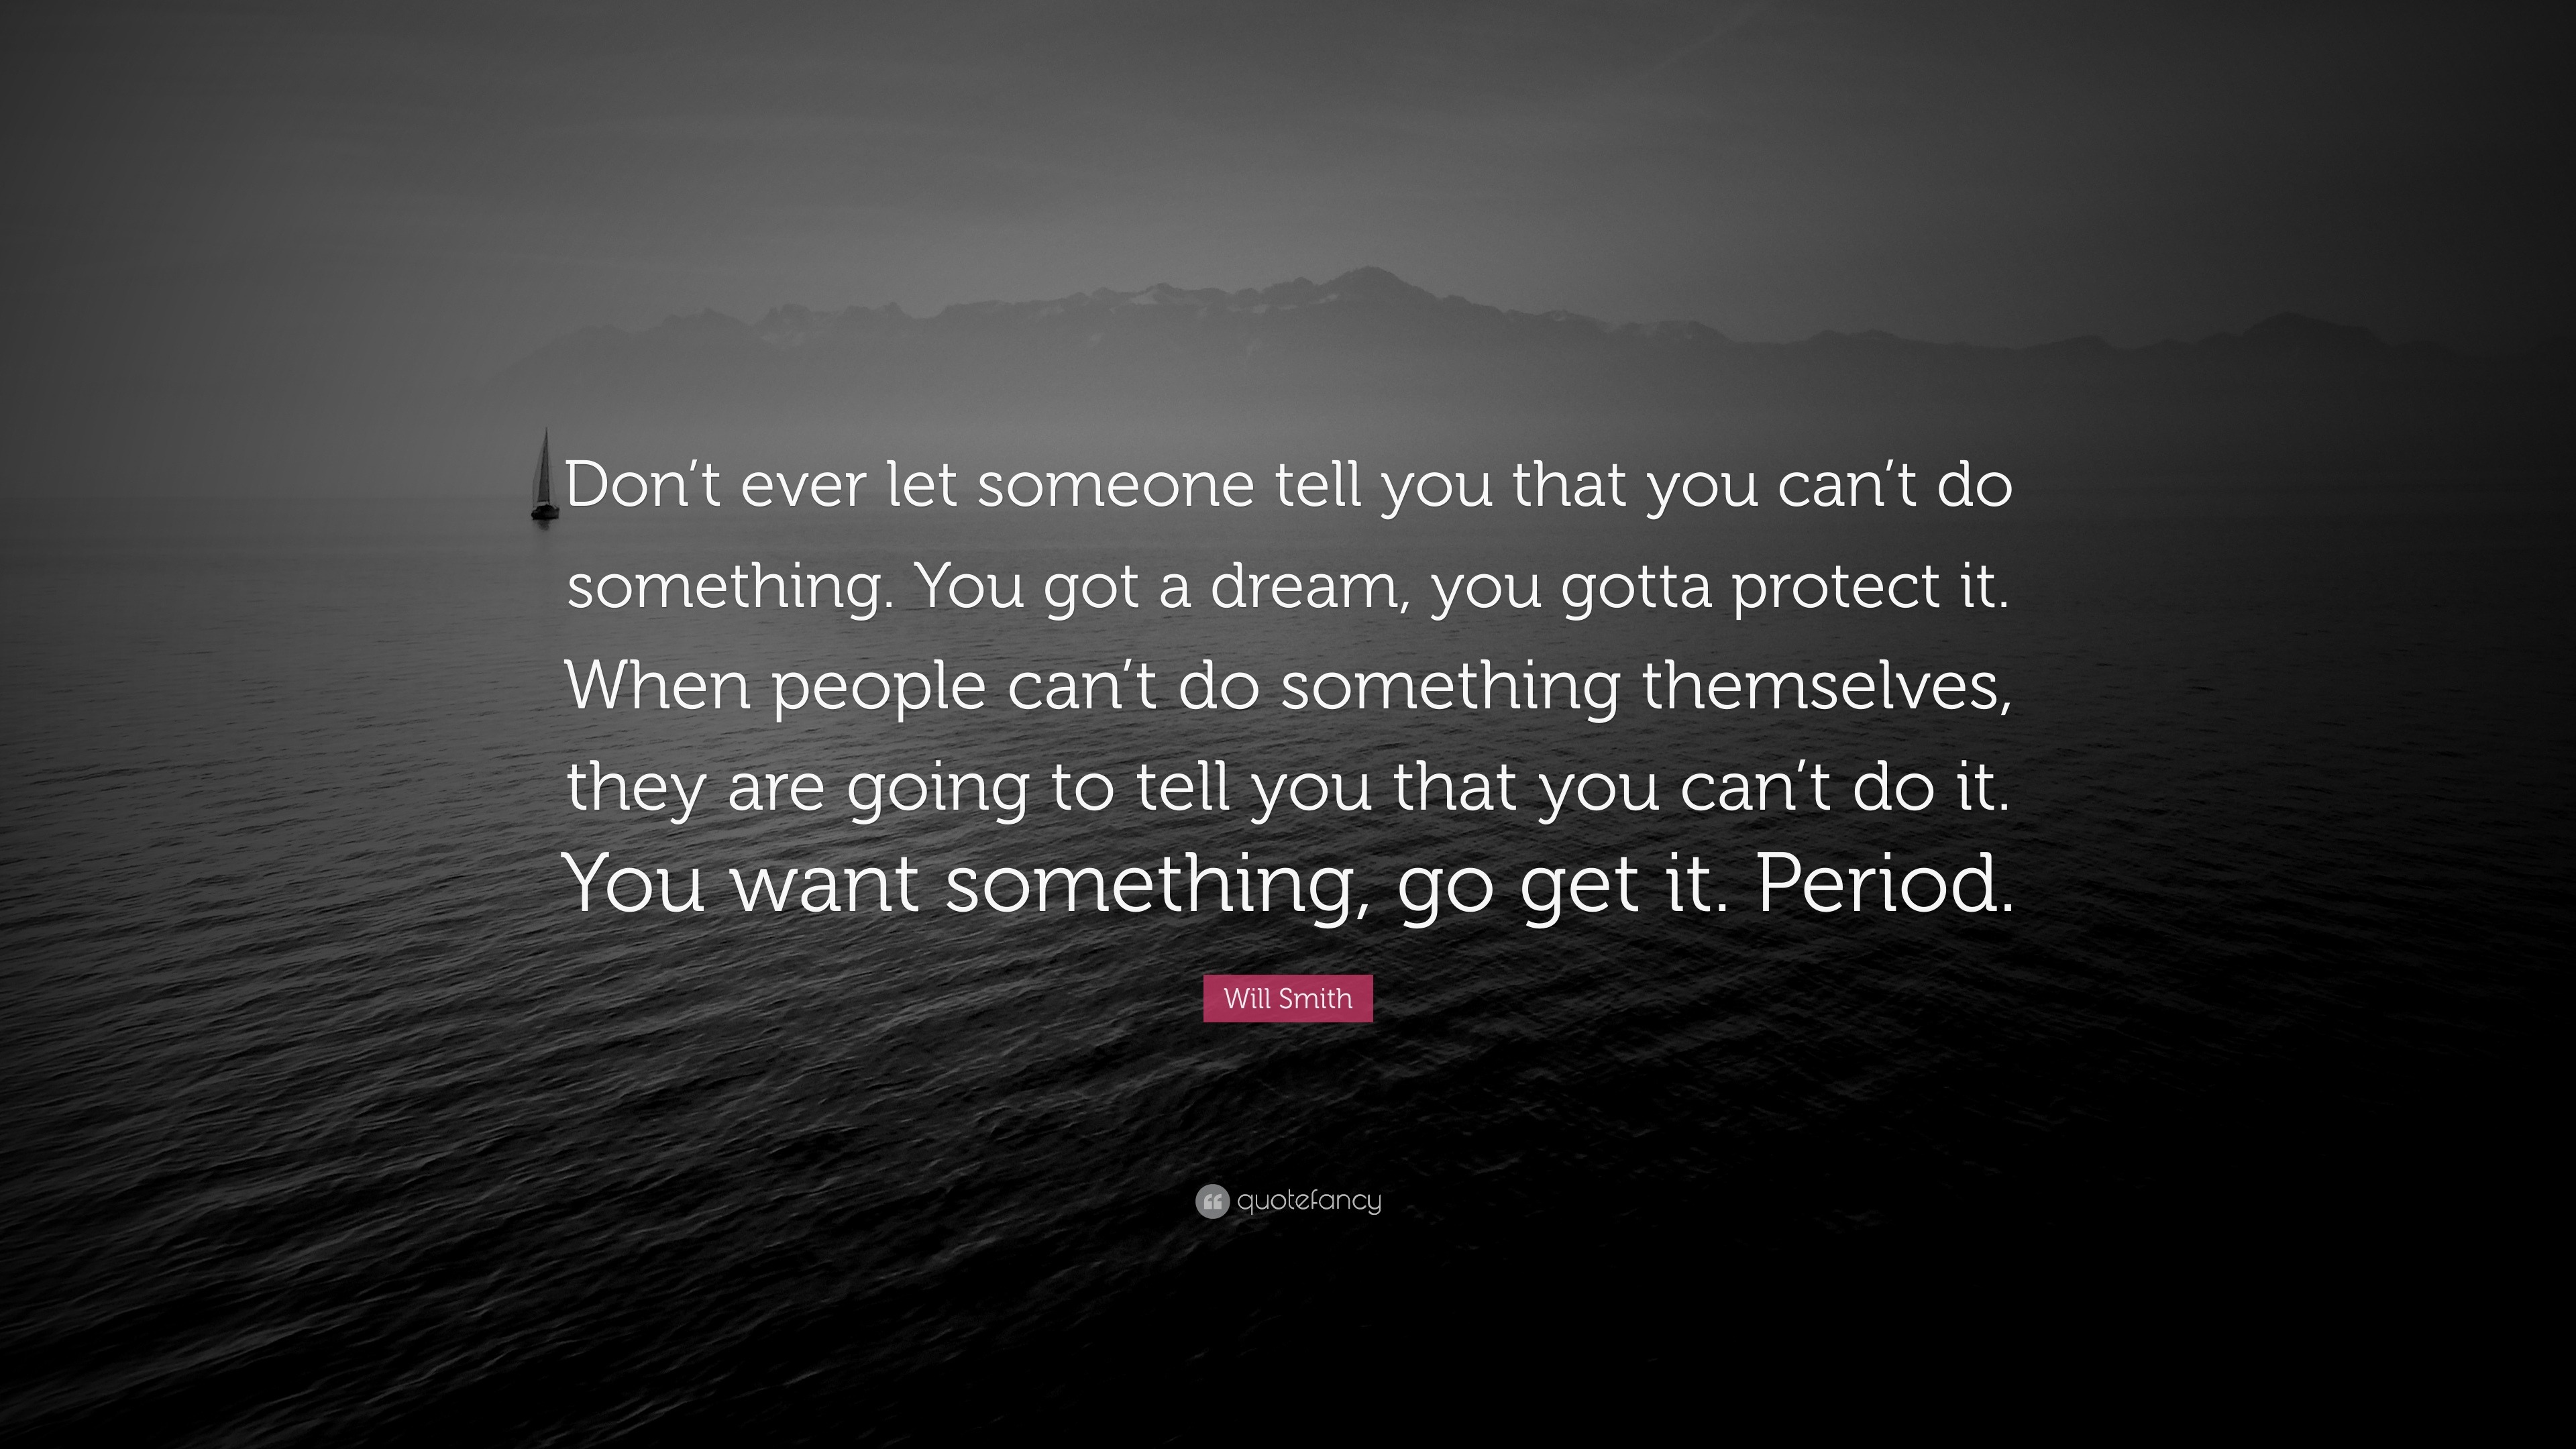 Will Smith Quote: “Don’t ever let someone tell you that you can’t do ...